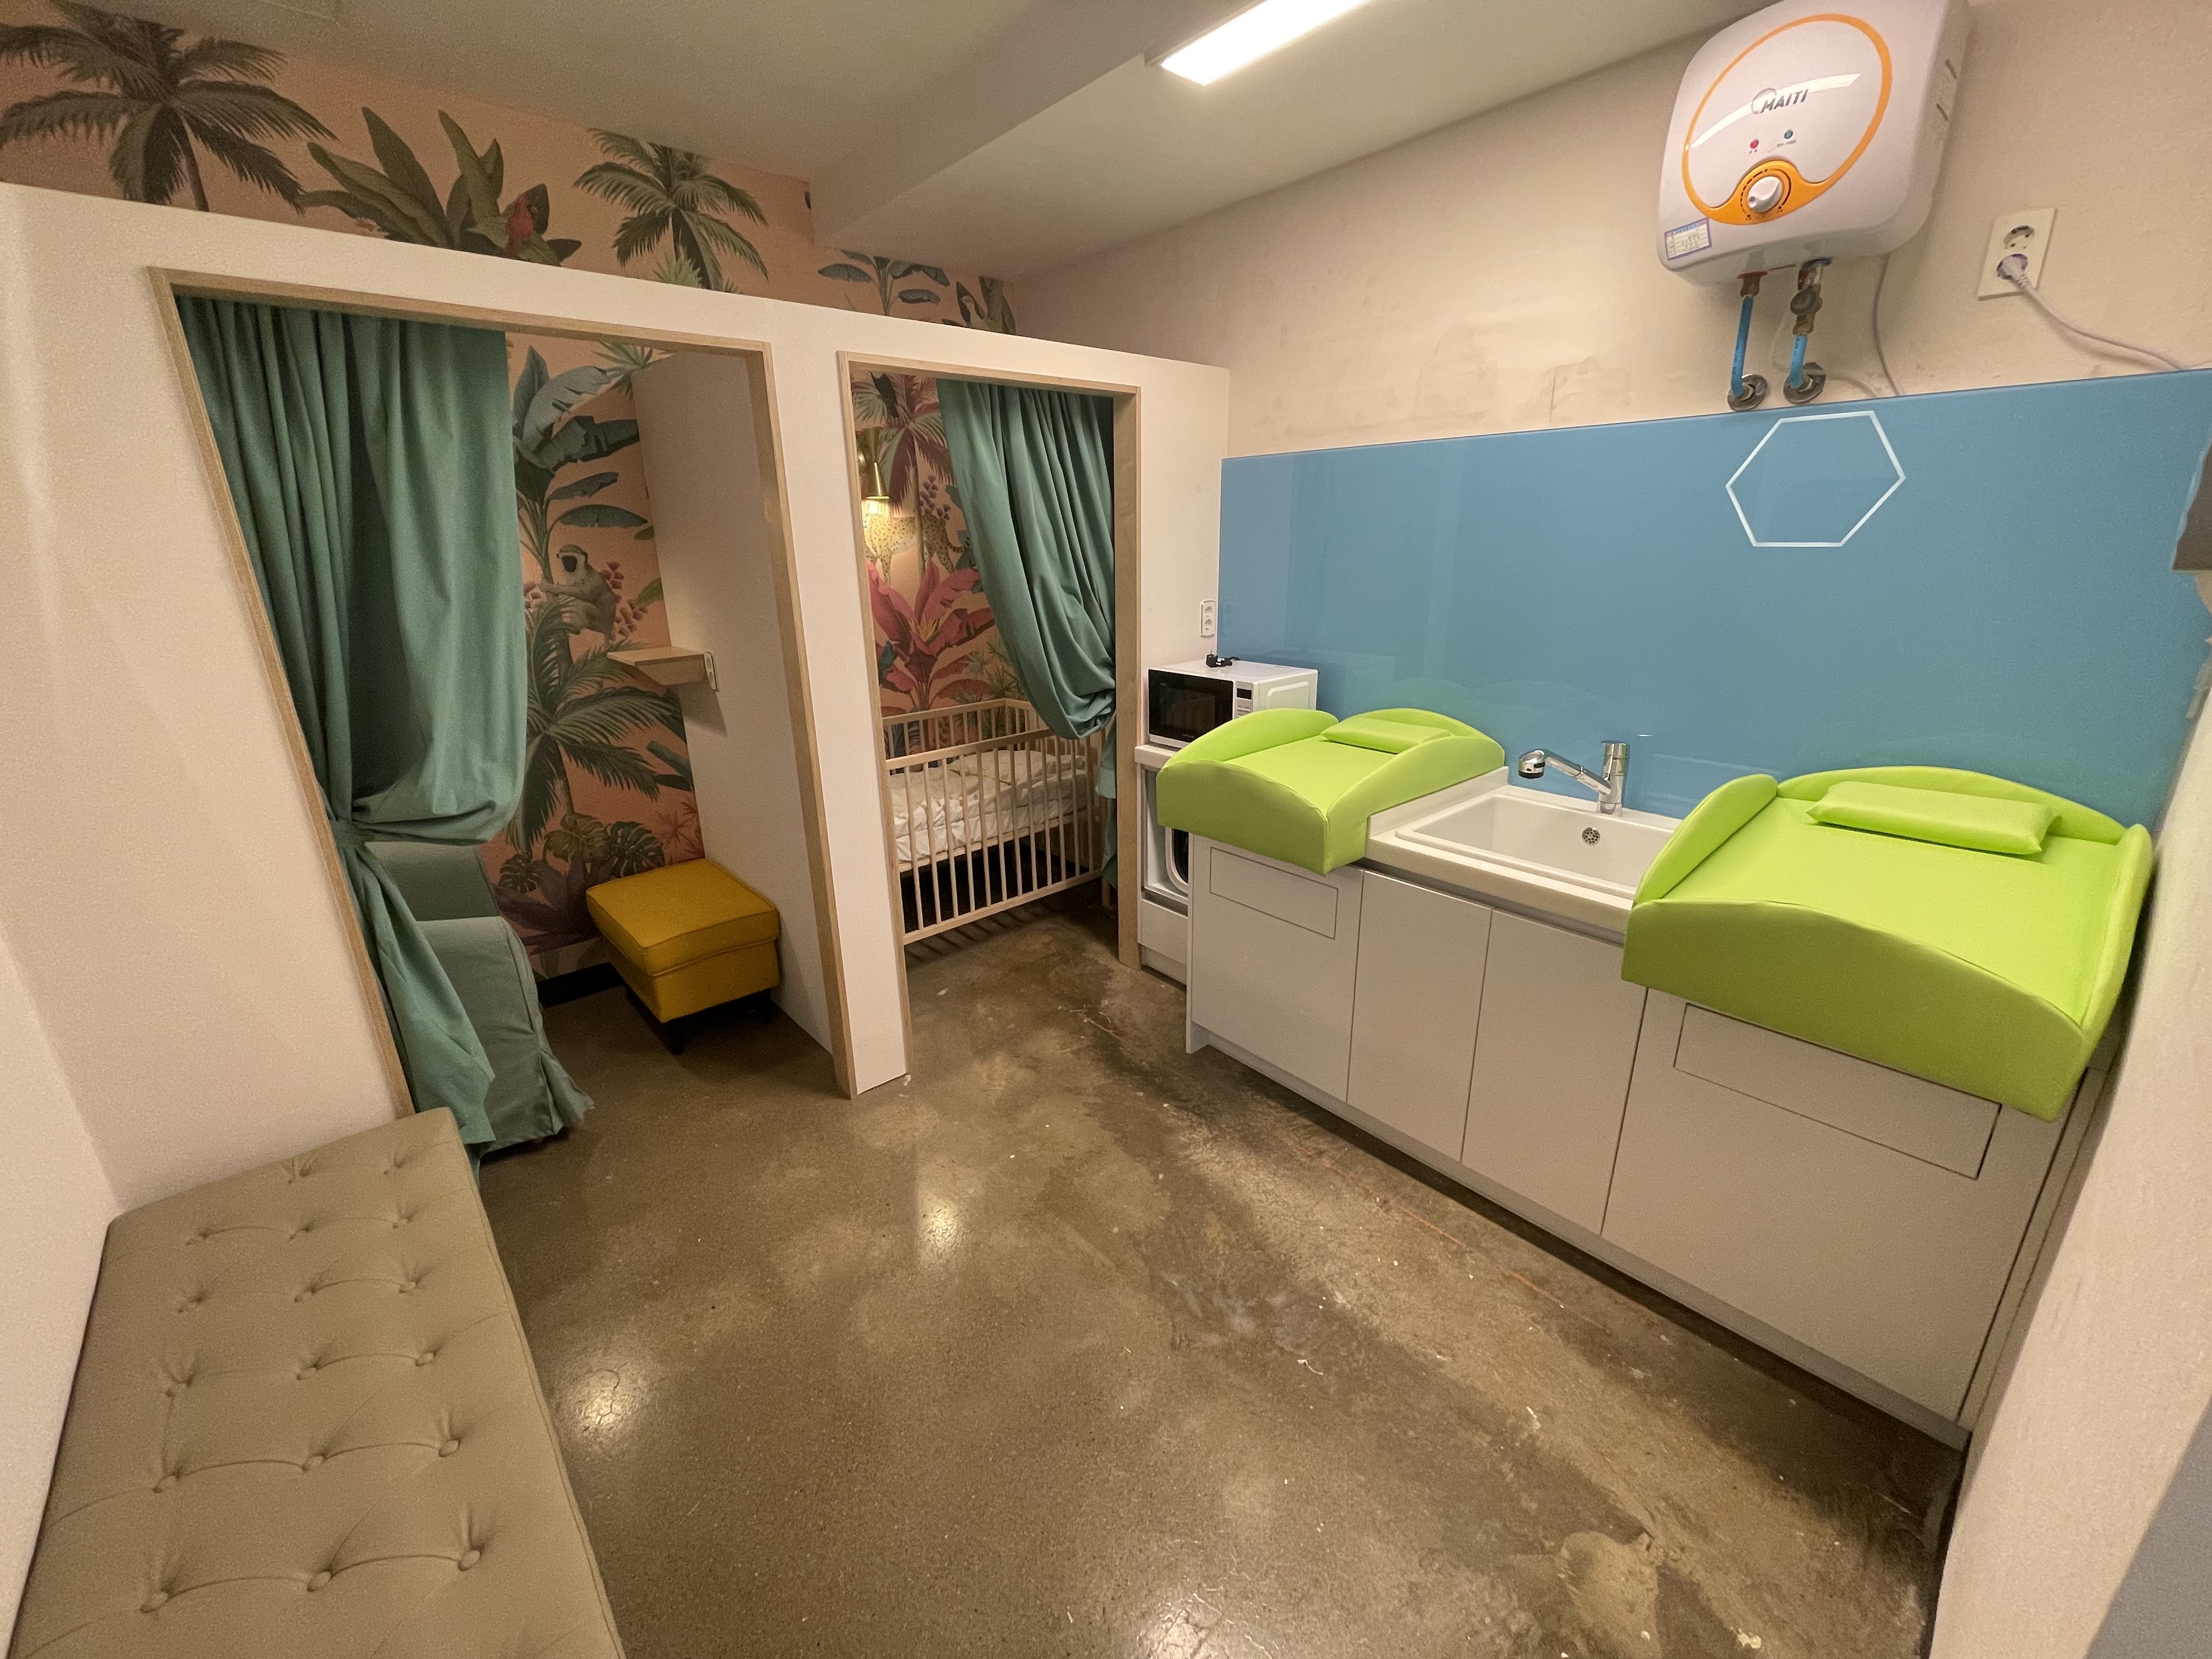 Nursing room 0 : A spacious nursing room with a diaper changing station and baby bed